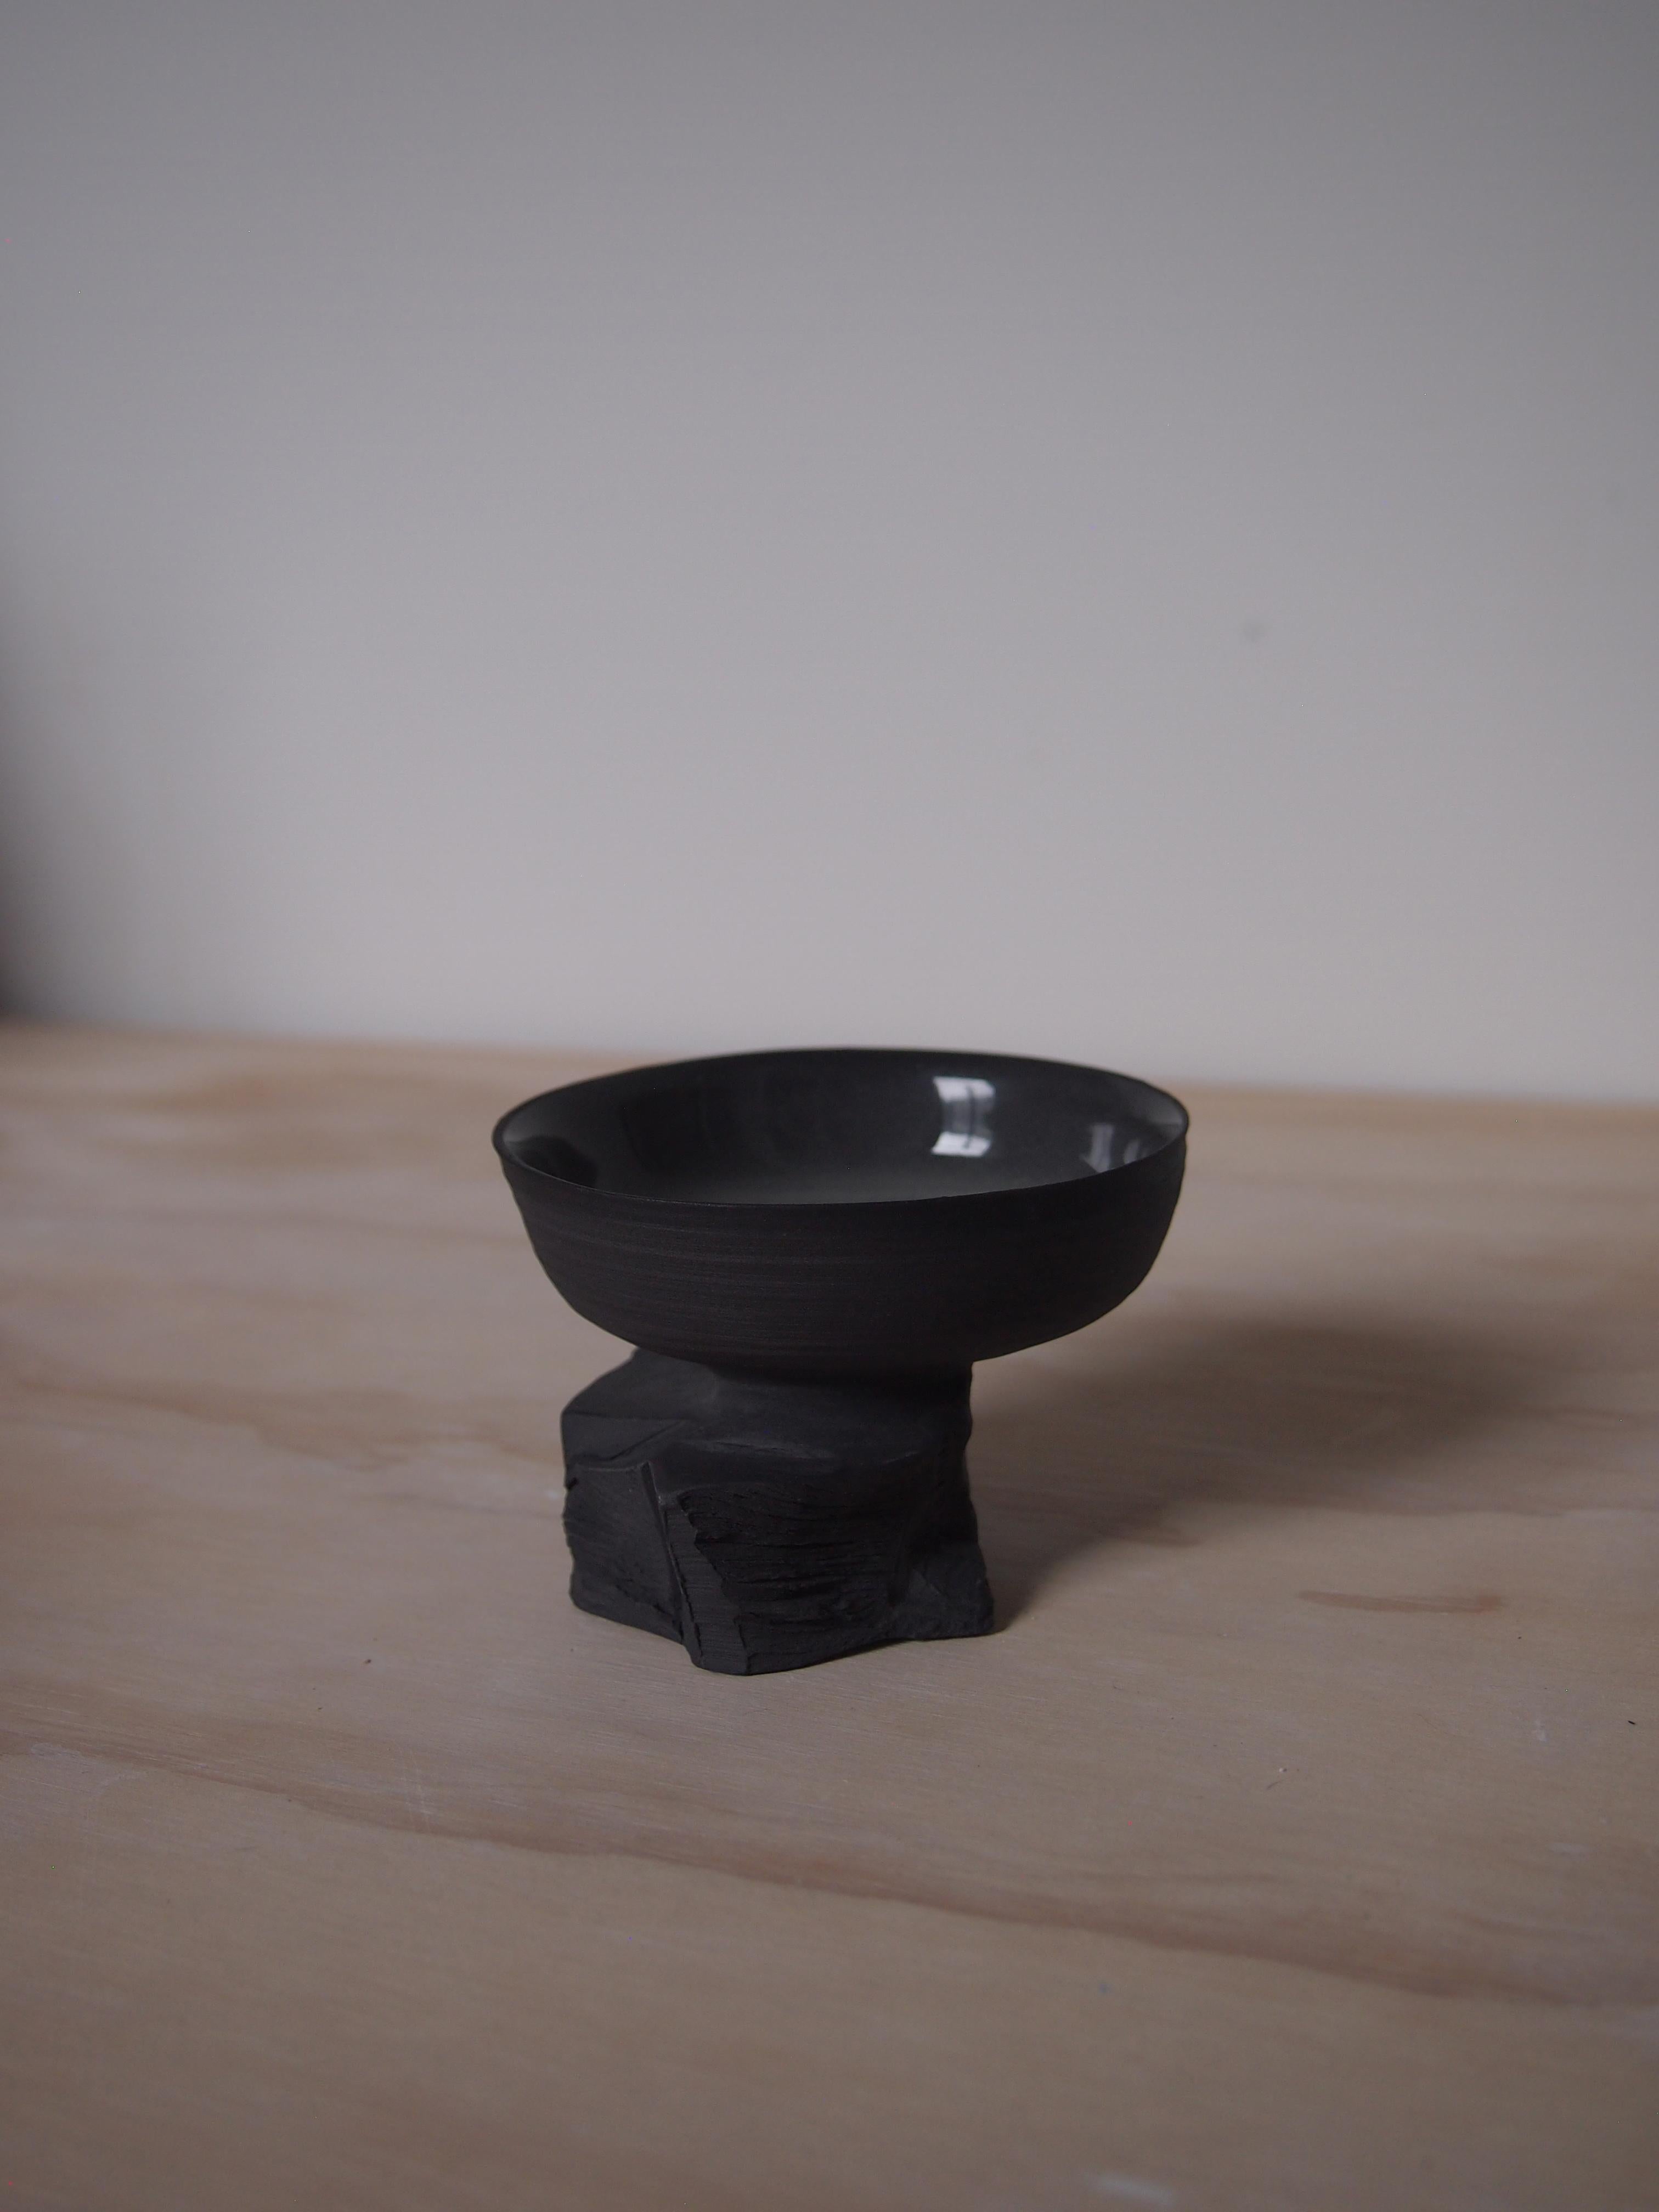 Short Quarry Cup by Liyang Zhang
One Of A Kind.
Dimensions: D 8 x W 8 x H 6 cm.
Materials: Black porcelain. 

Made with single peice of black porcelain. The top is made on the wheel and bottom is made by tearing and chiselling.  The form reveals